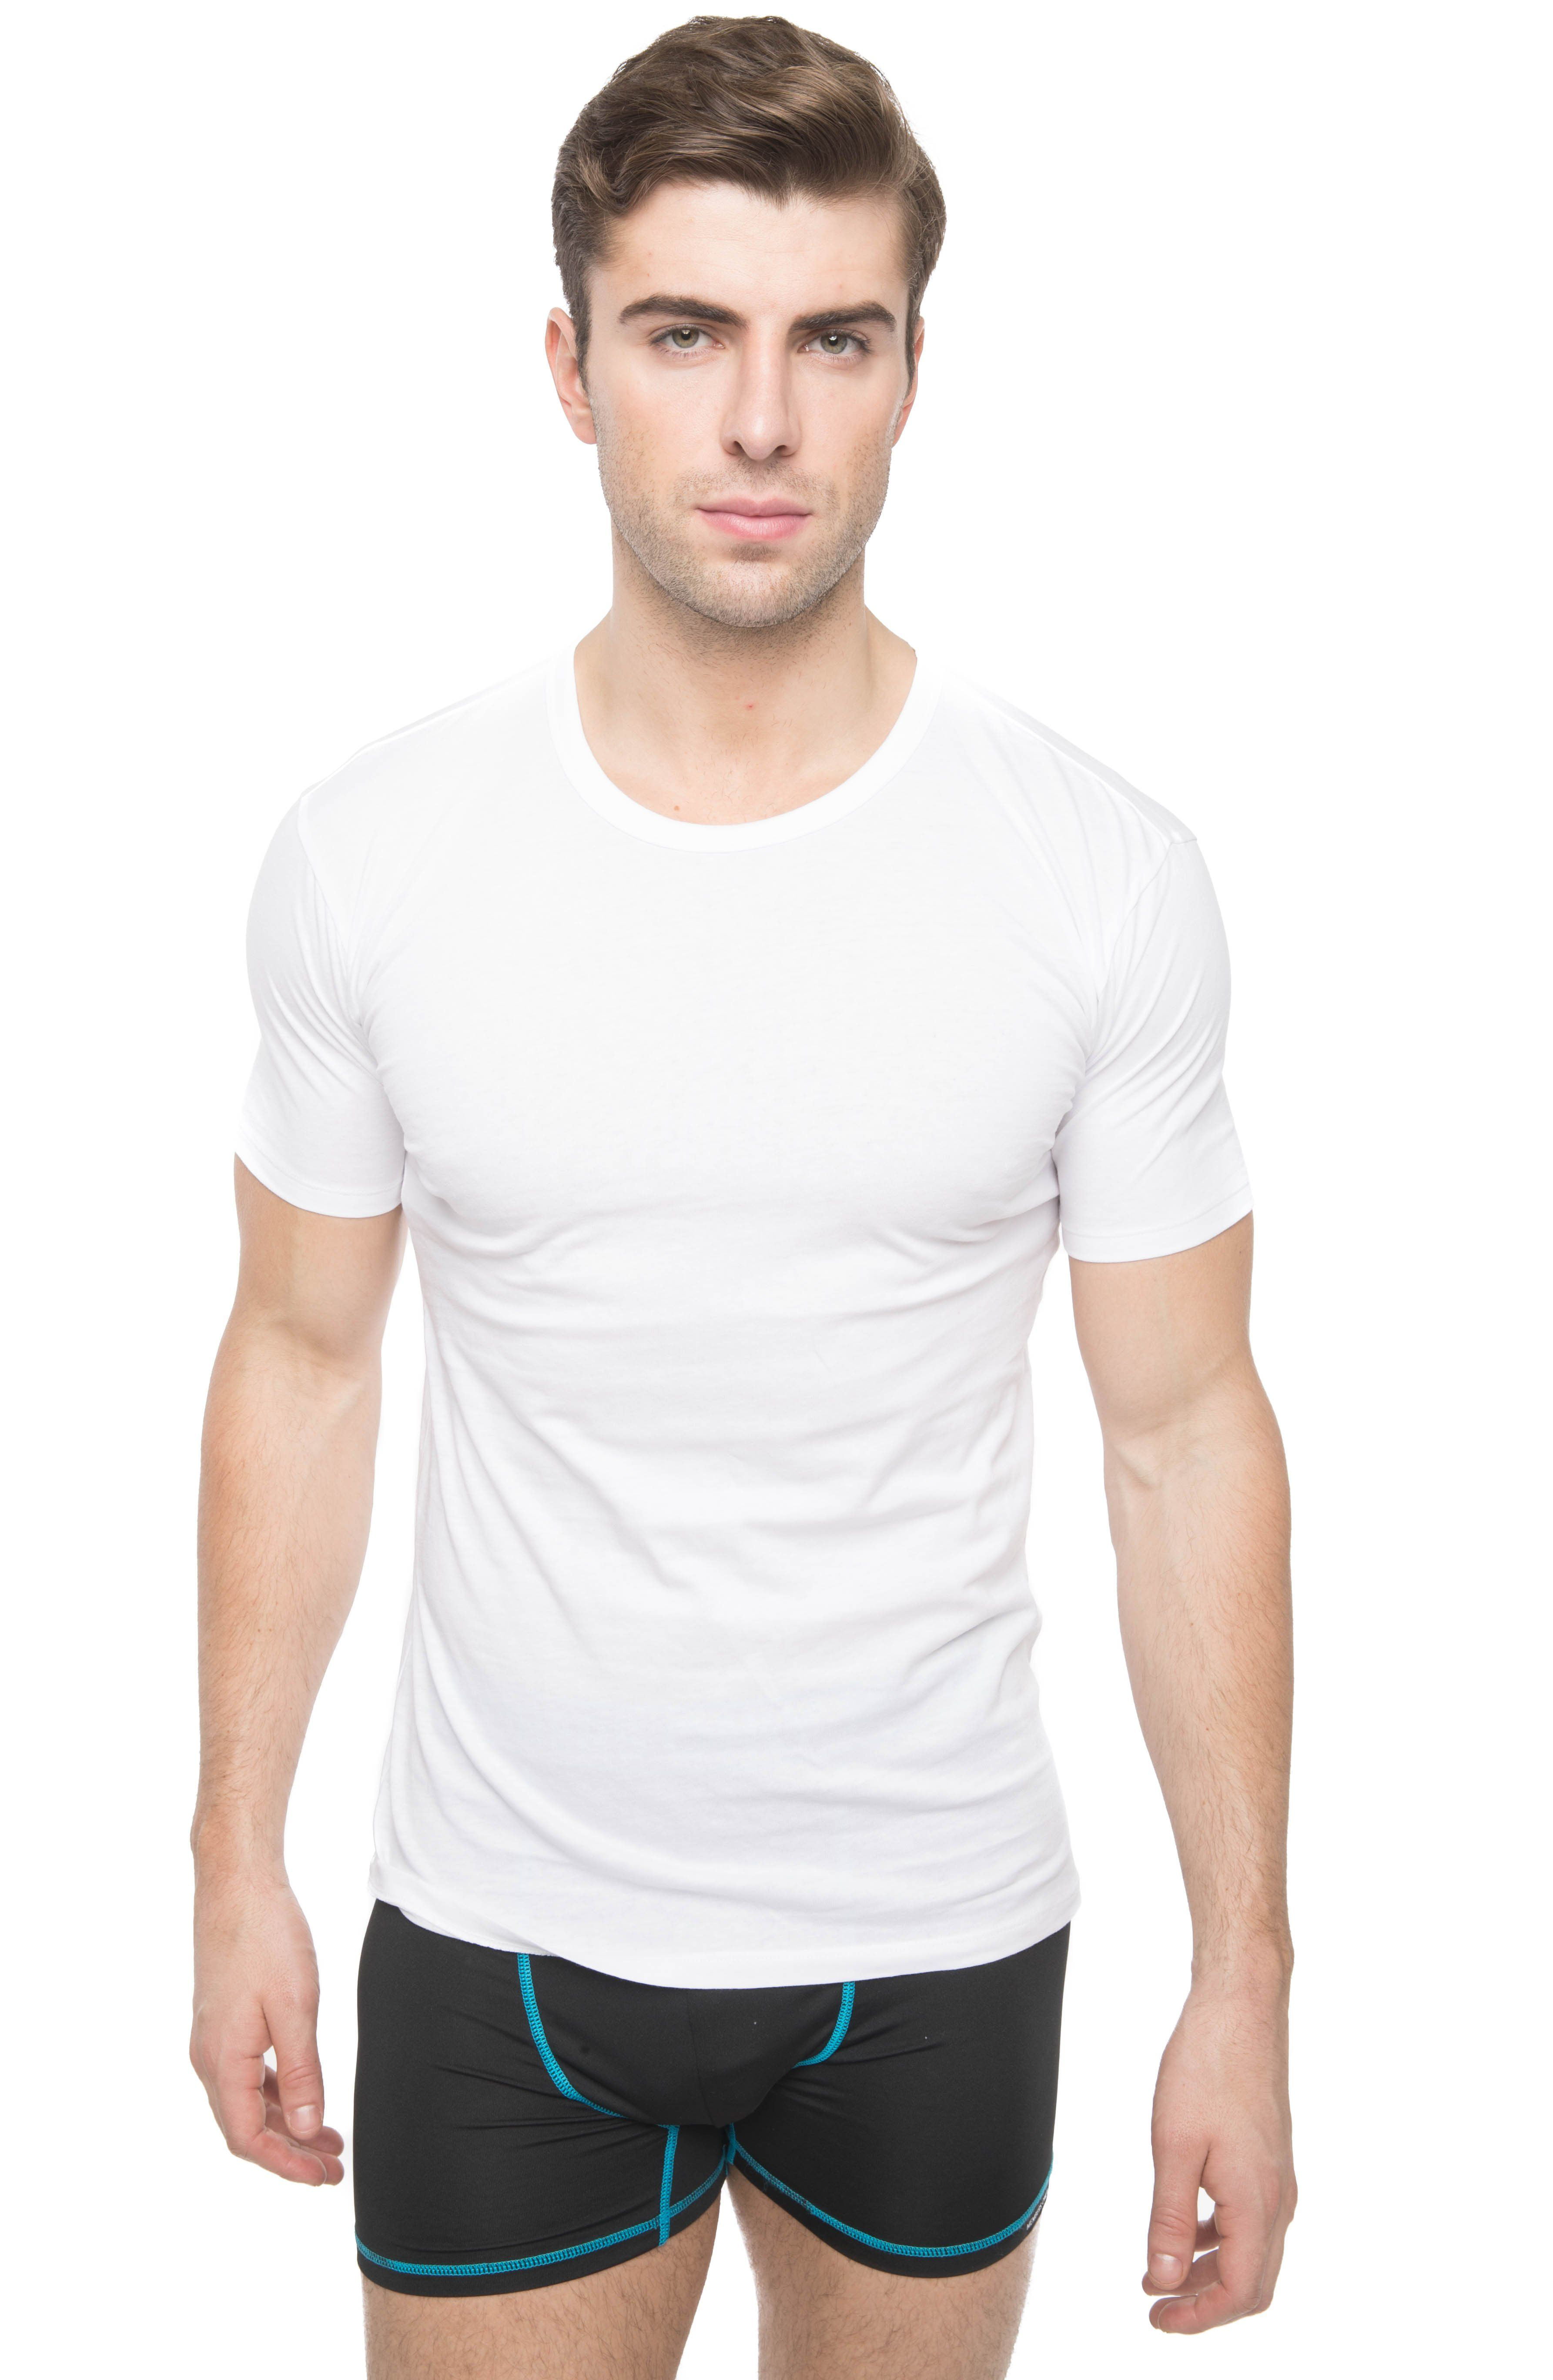 Members Only - Members Only Men's 3PK Cotton Crew Neck T-Shirt ...